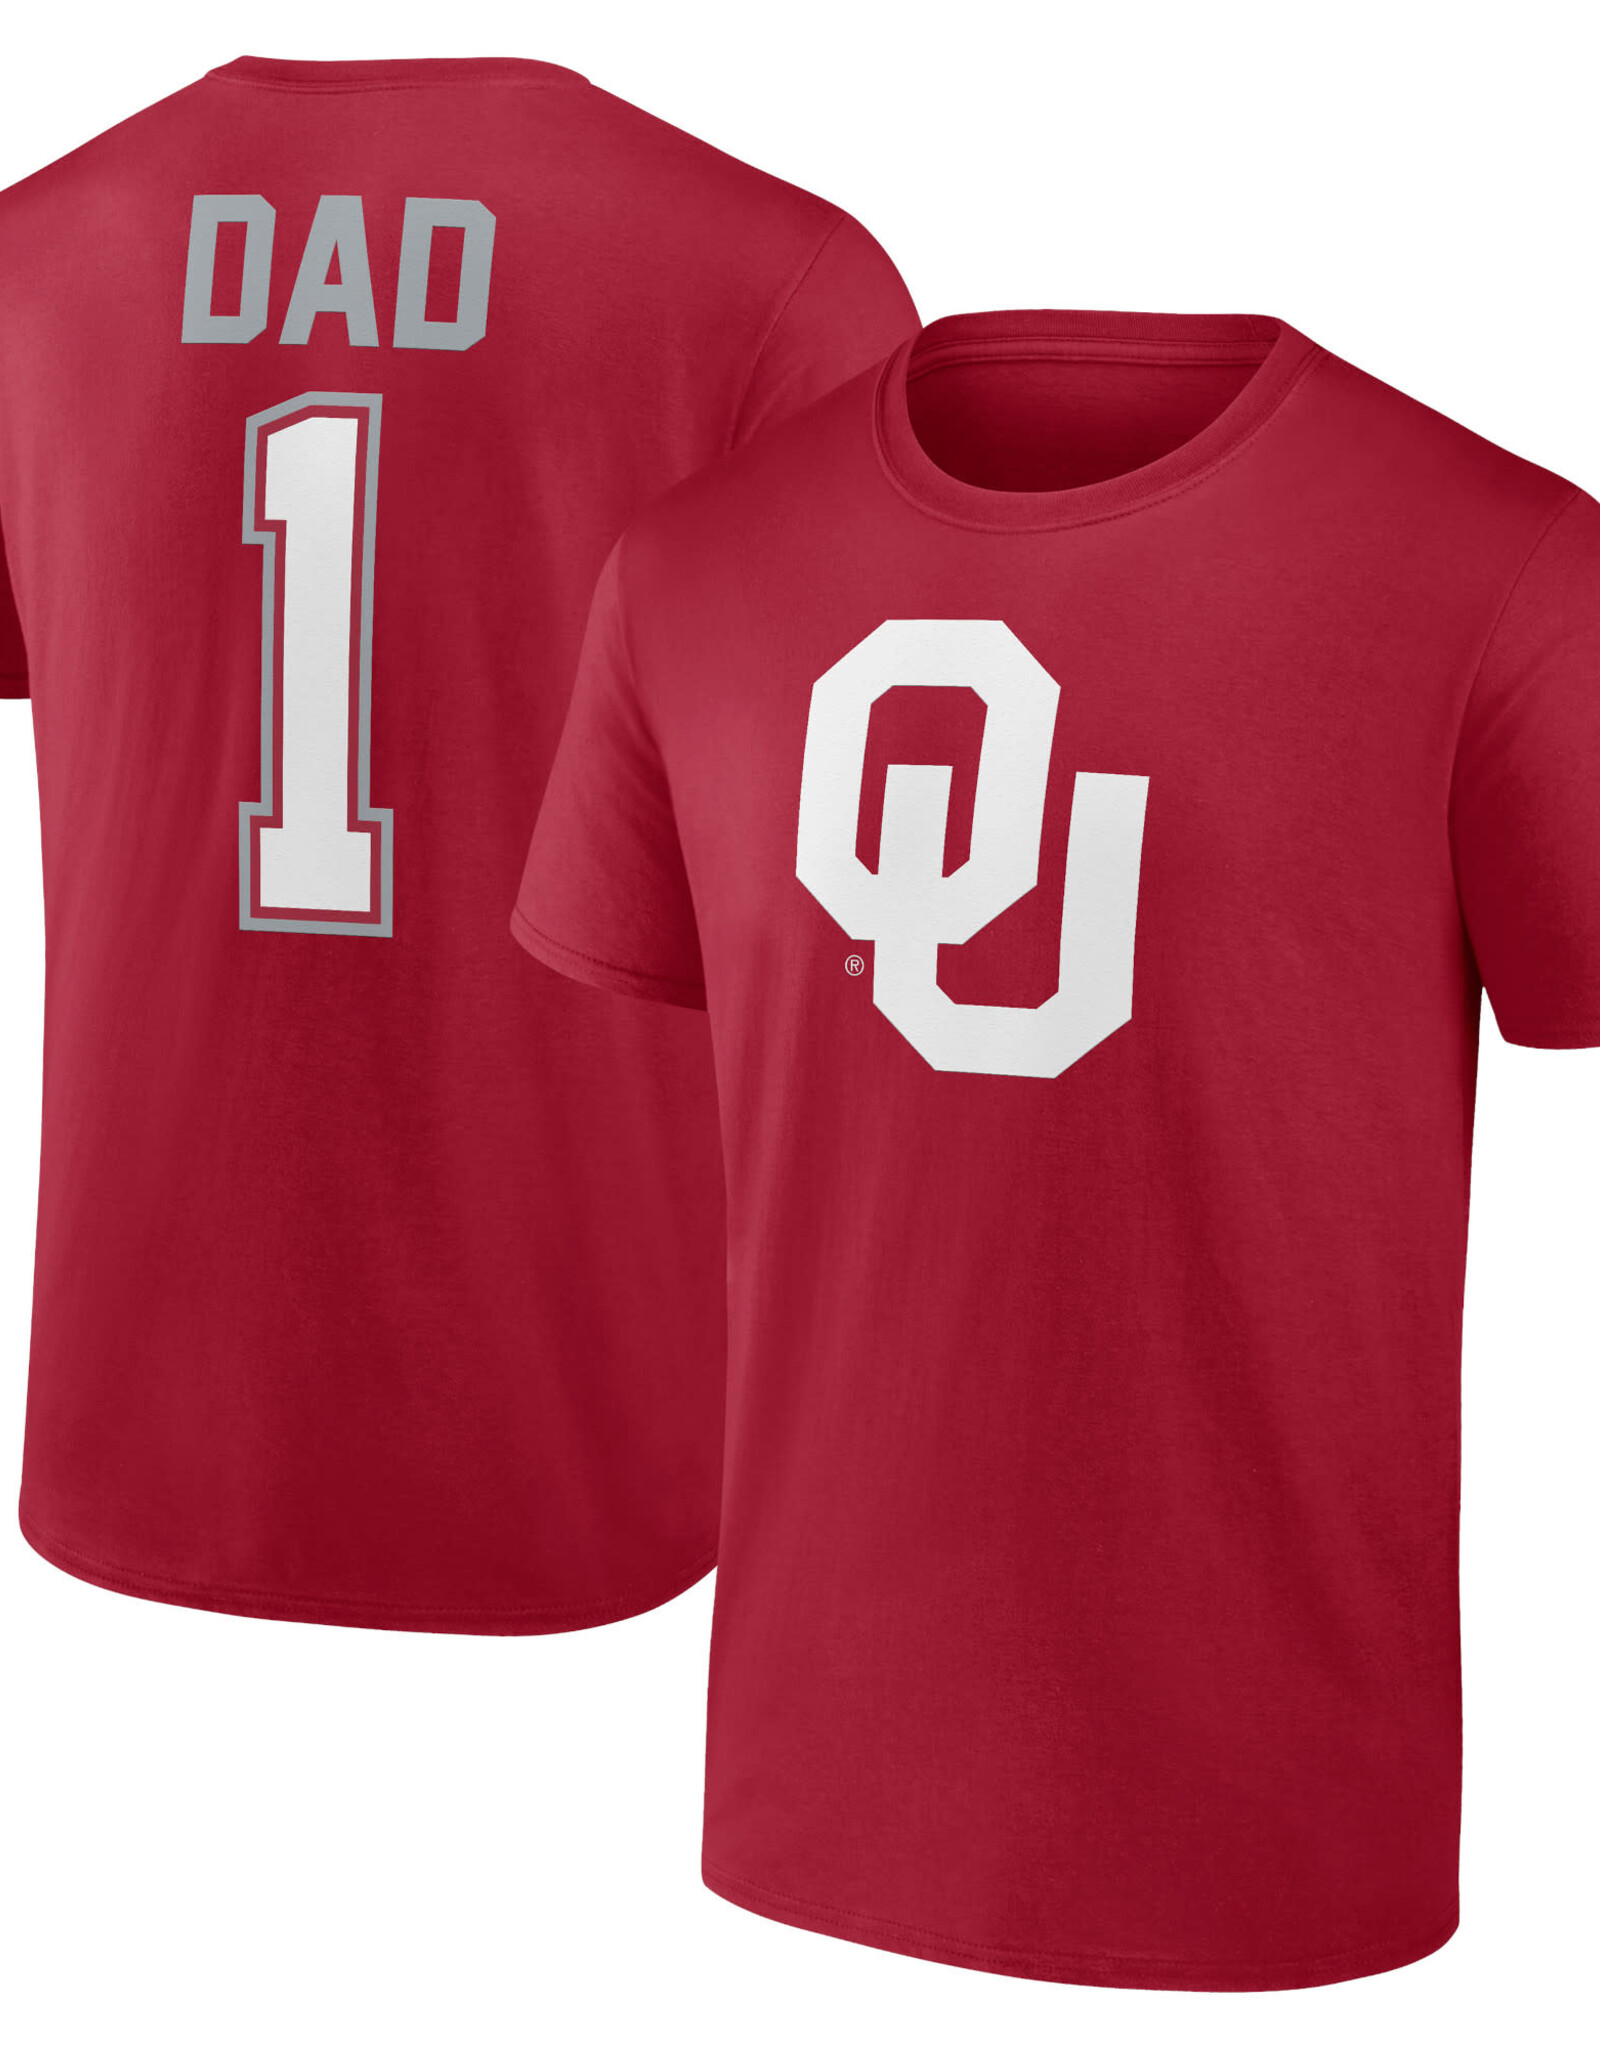 Fanatics Men's #1 Dad Father's Day Tee